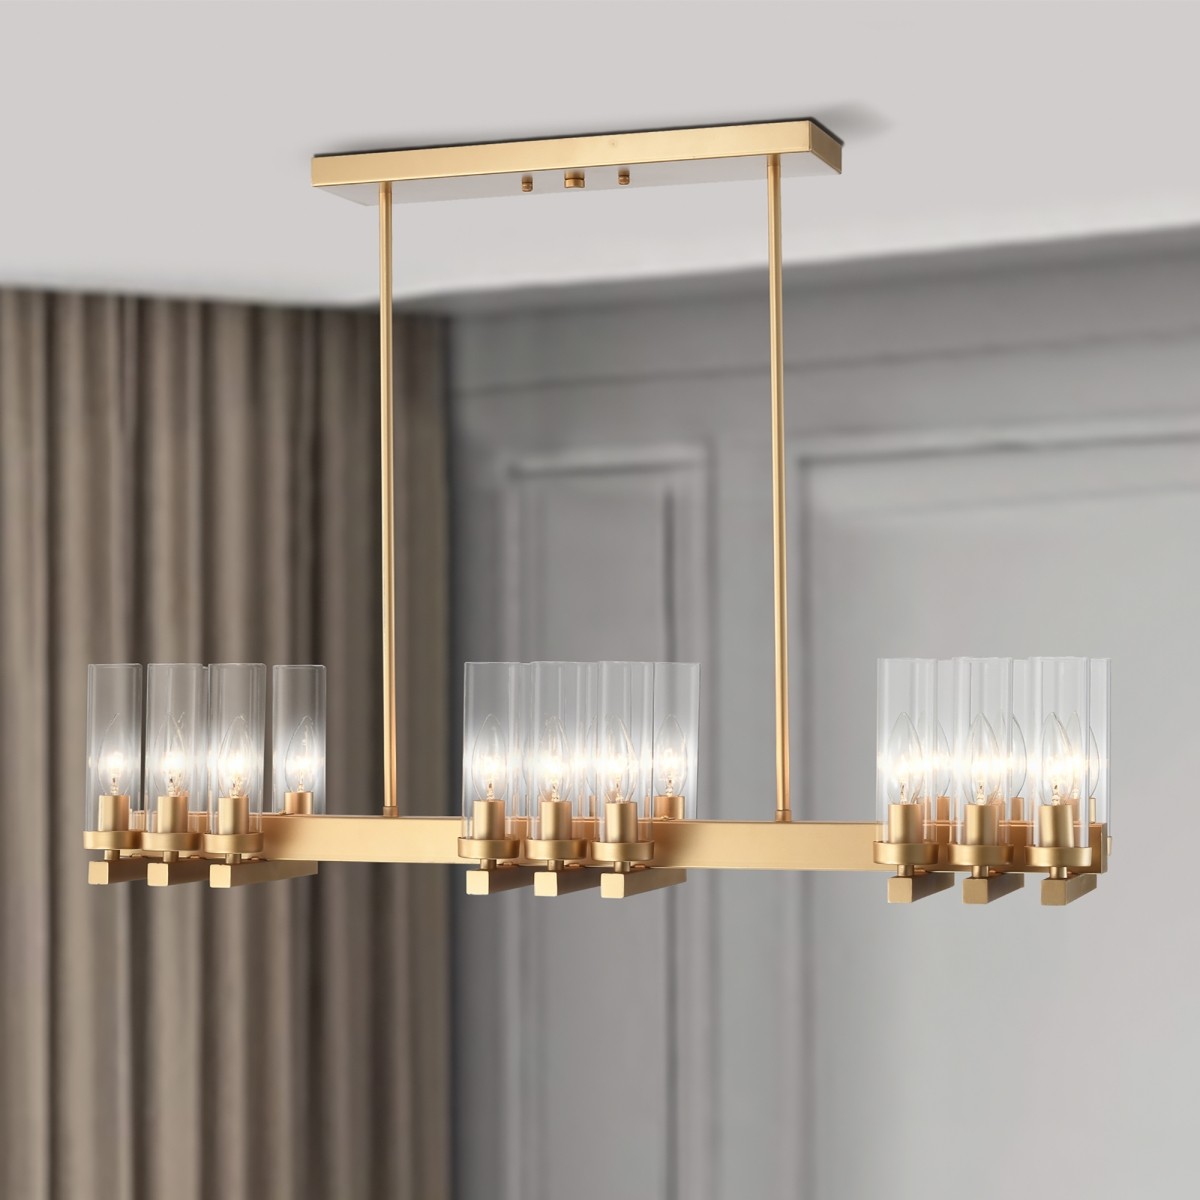 Shea 36 in. 18-Light Indoor Matte Gold Finish Chandelier with Light Kit